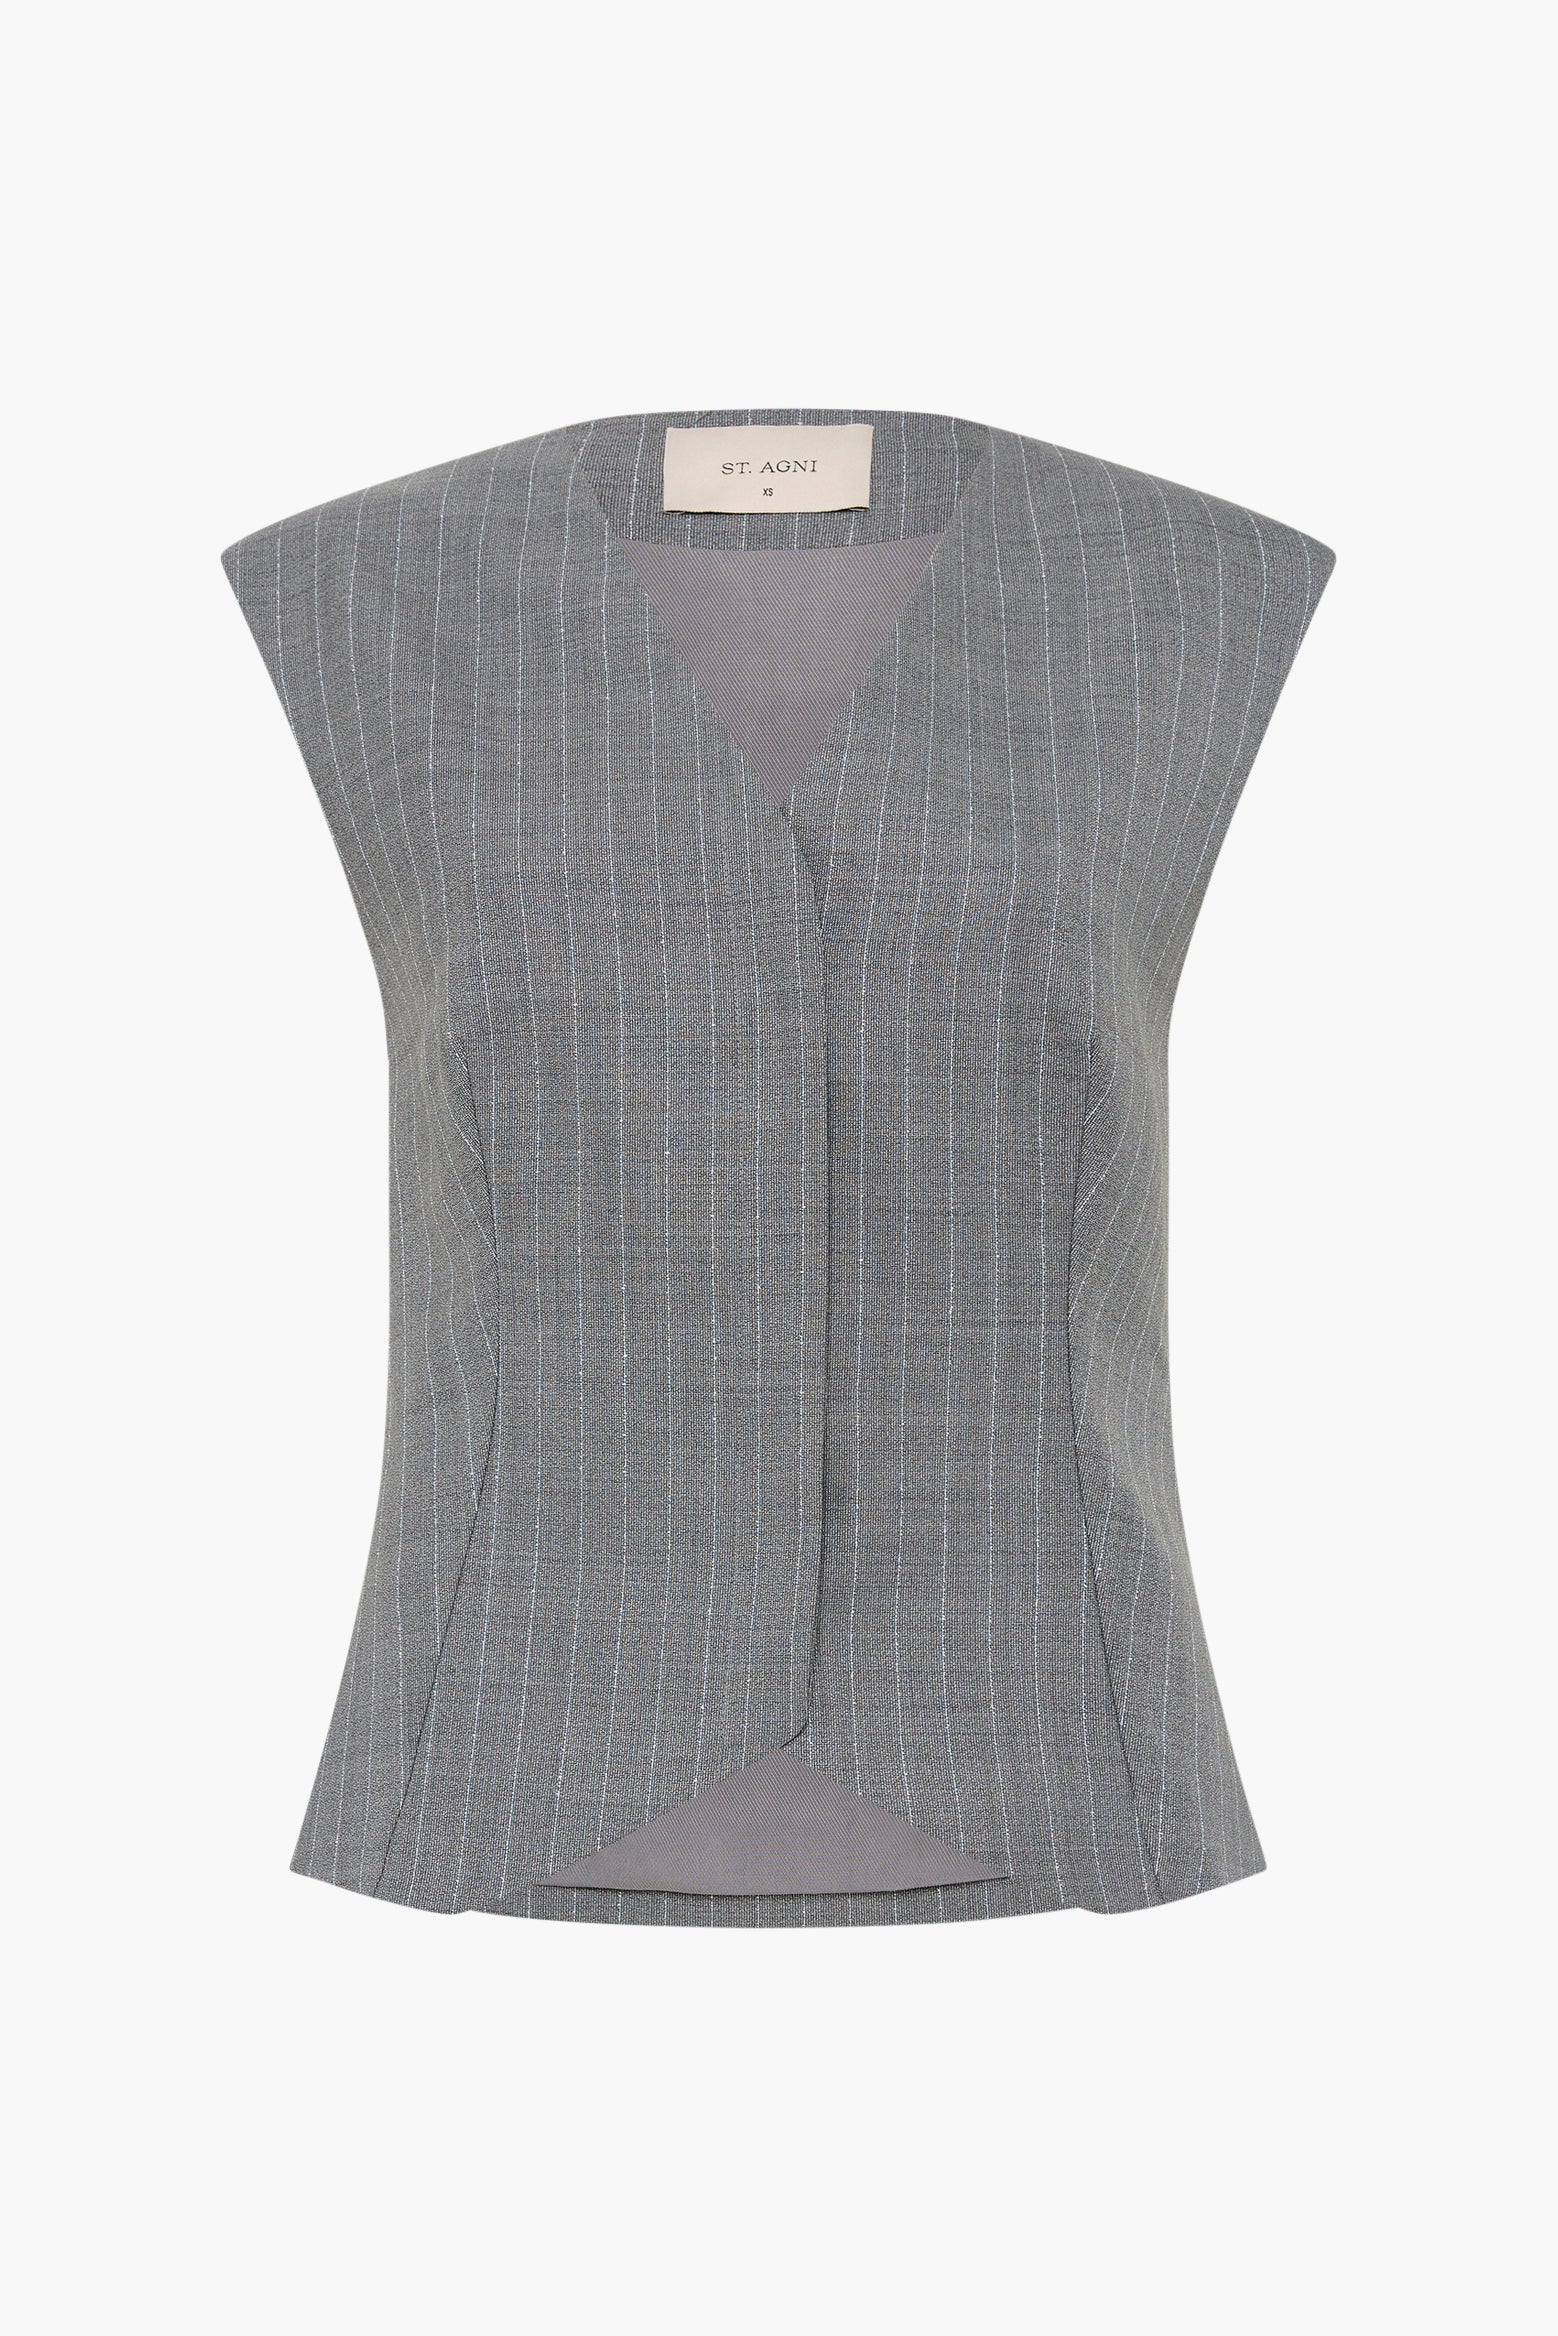 St Agni Wool Vest in Chalk Stripe available at TNT The New Trend Australia